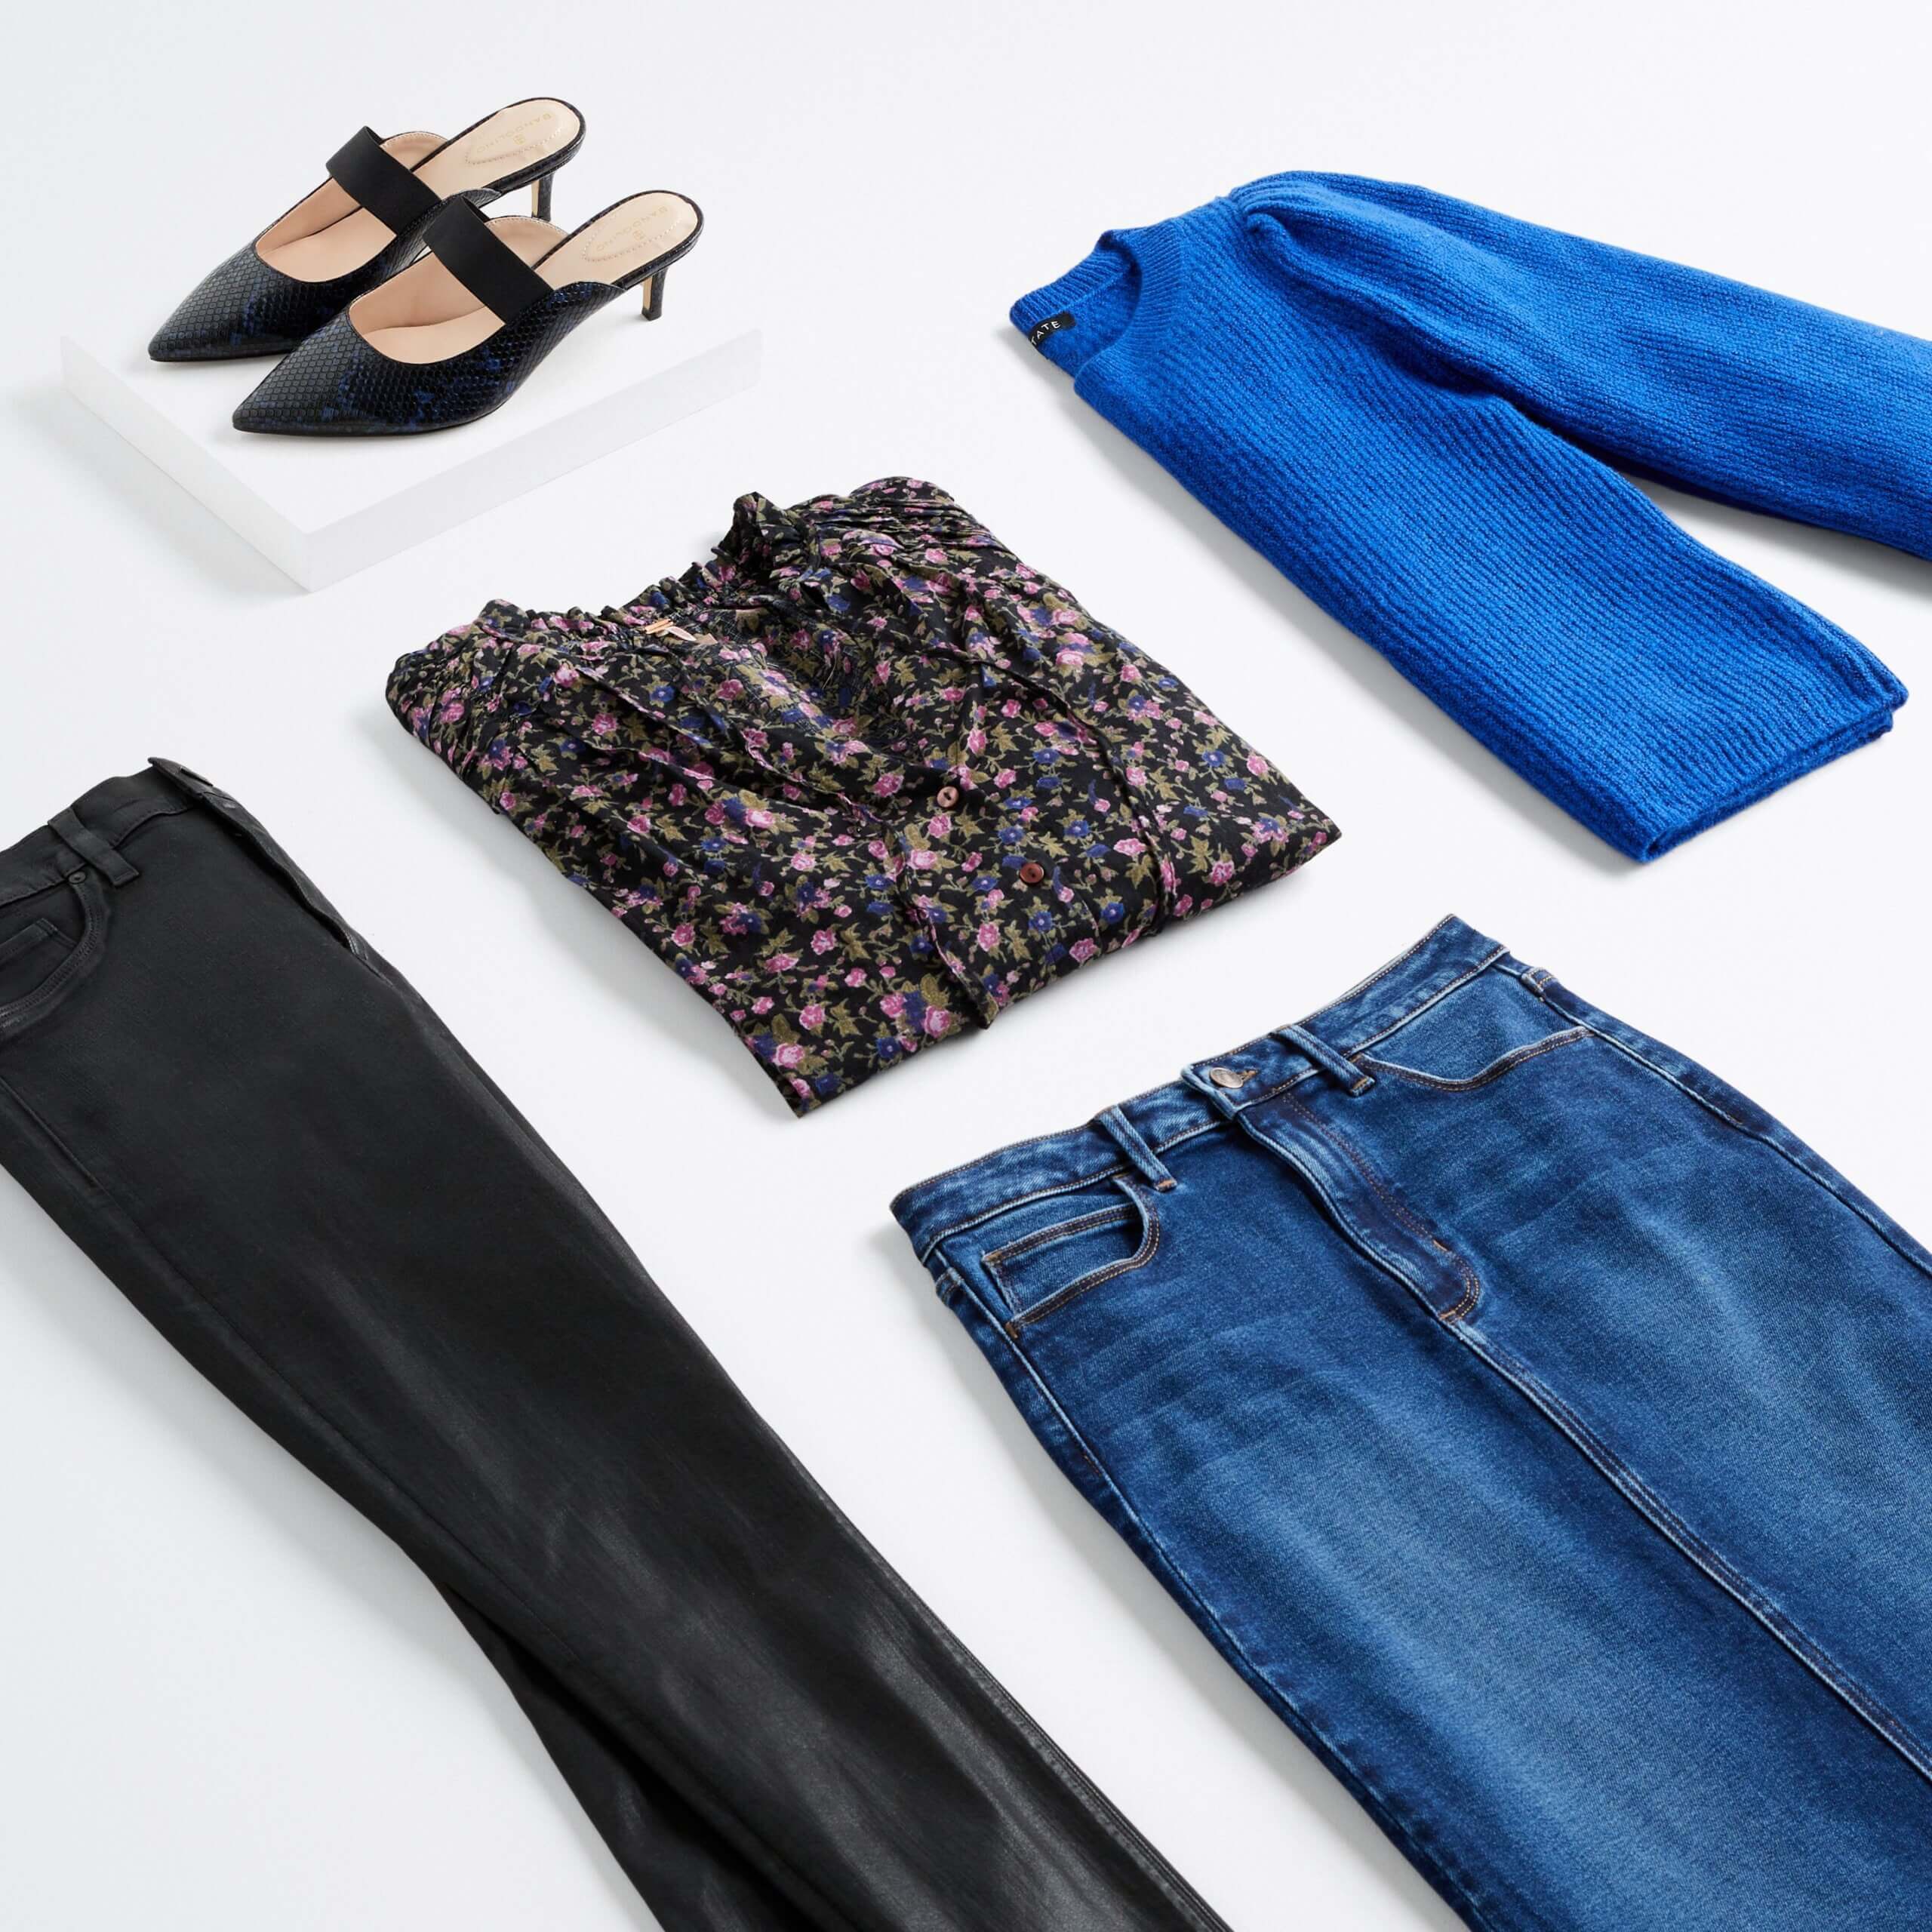 Stitch Fix women's petite with large bust outfit with black pants, denim skirt, floral blouse, black pumps and blue sweater.